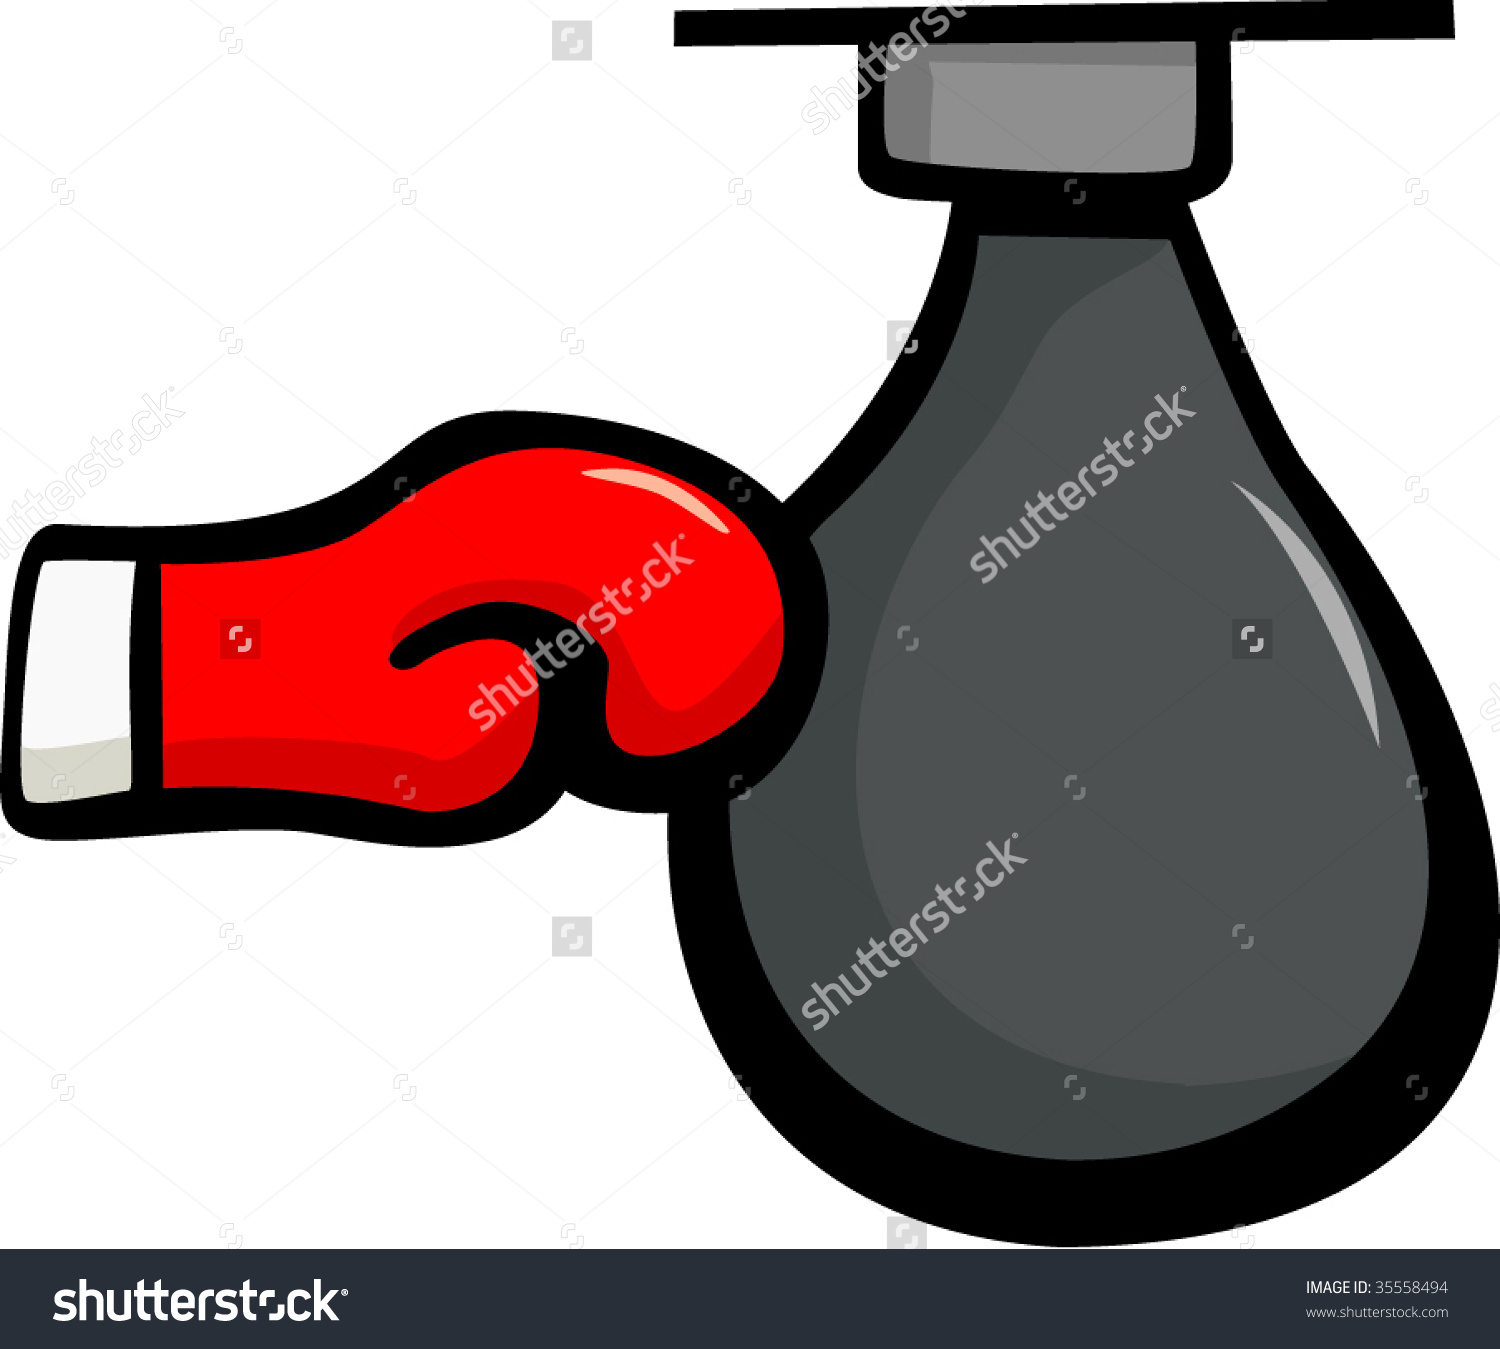 Boxing Glove Punching Speed Bag Stock Vector 35558494.